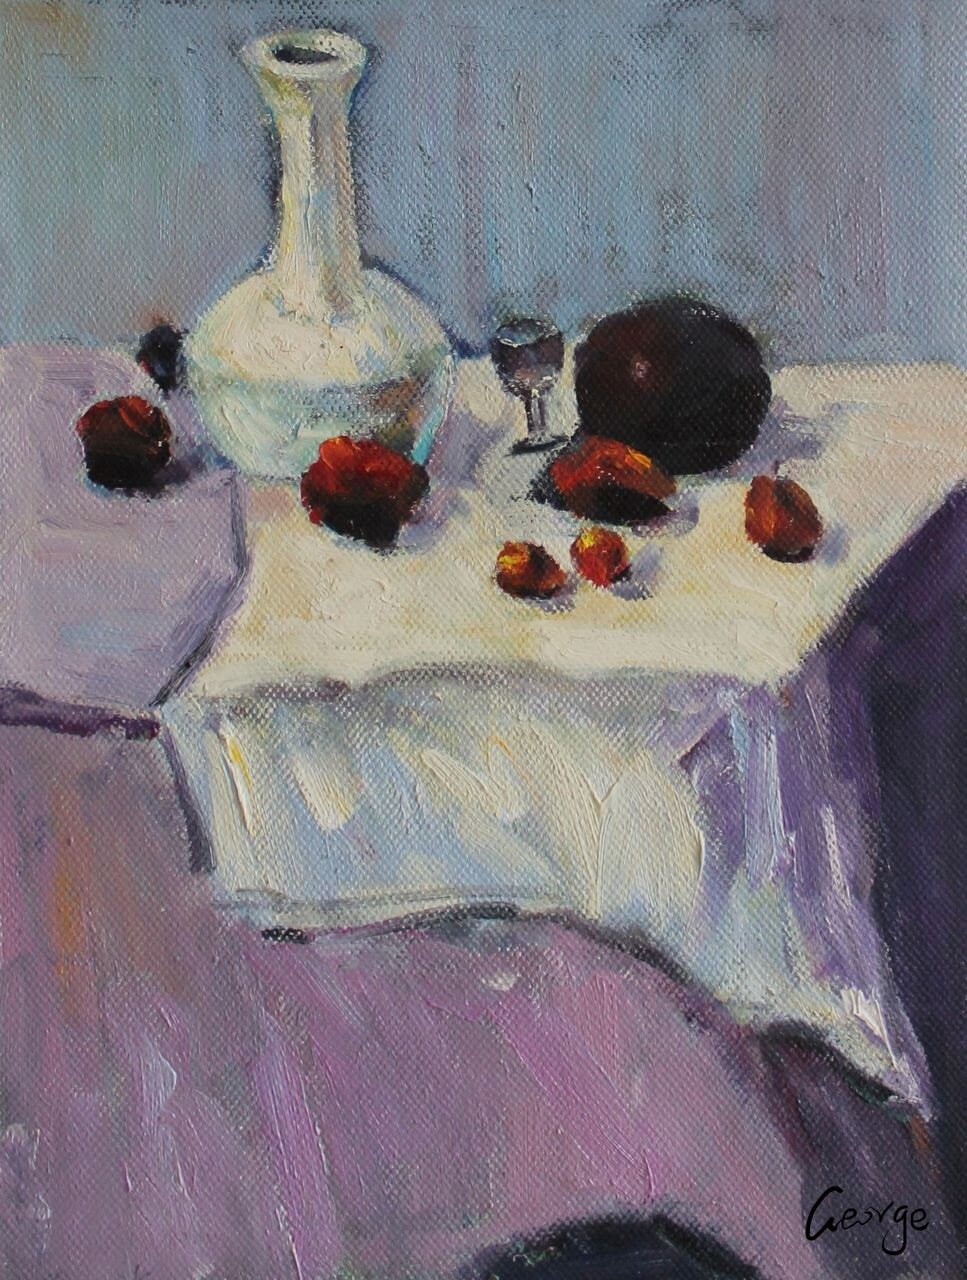 Oil Painting Still Life, Canvas Painting, Abstract Art, Original Oil Painting, Small Oil Painting, Canvas Wall Art, Still Life Painting